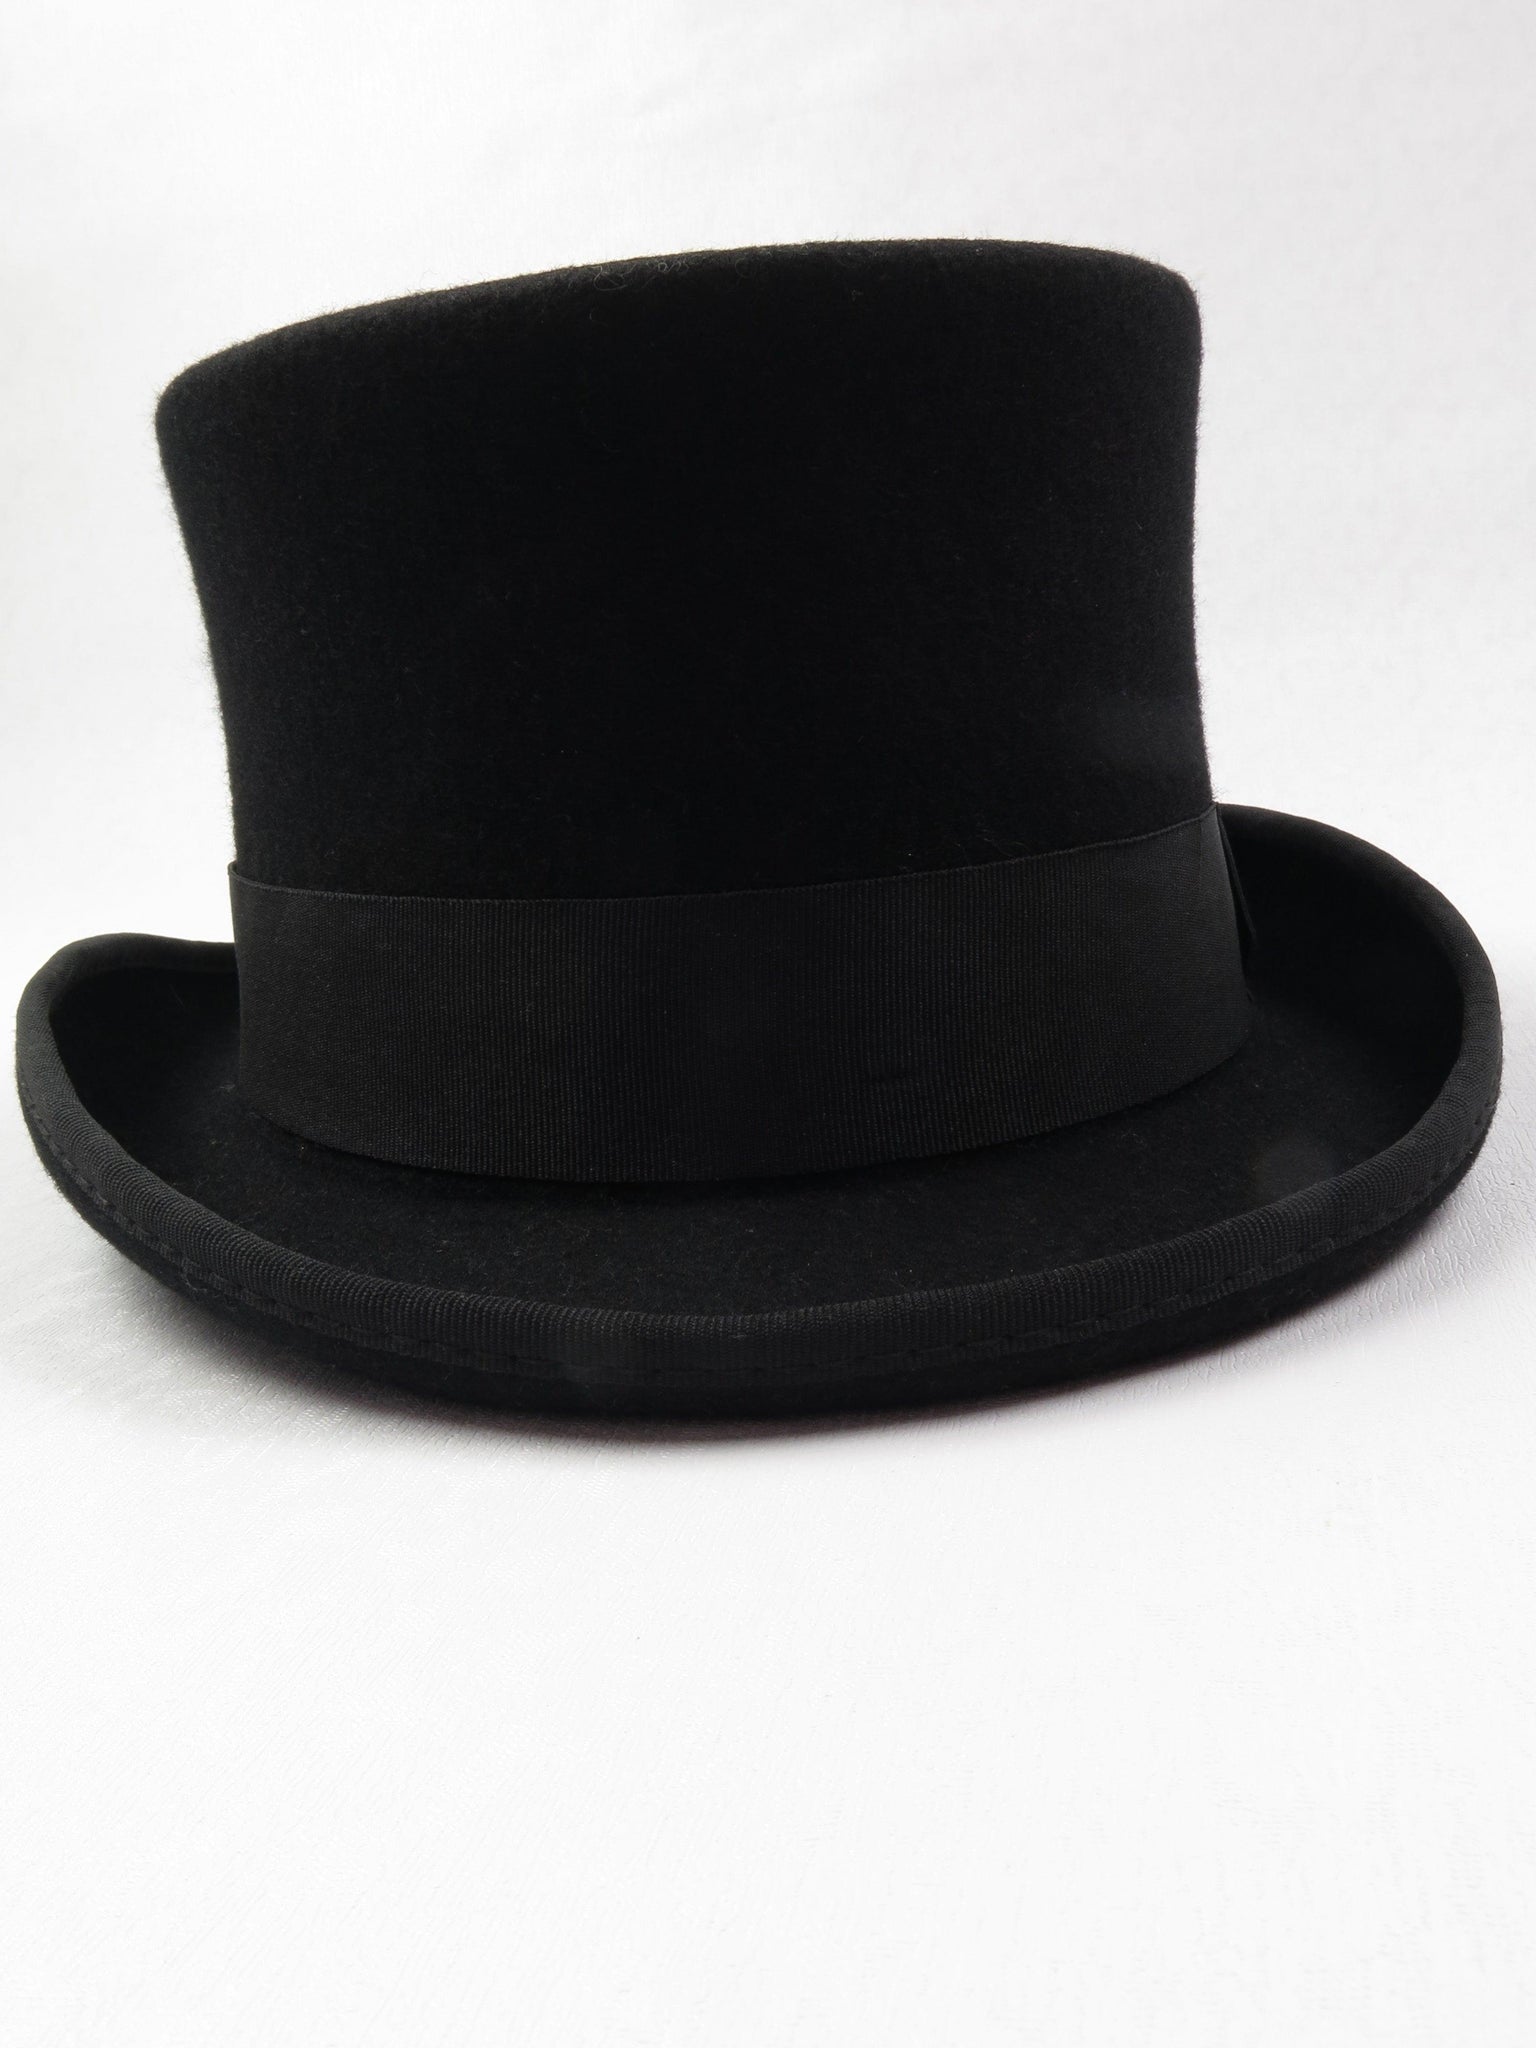 New Classic Vintage Style  Black Top Hat{ Diff Sizes Avail } - The Harlequin